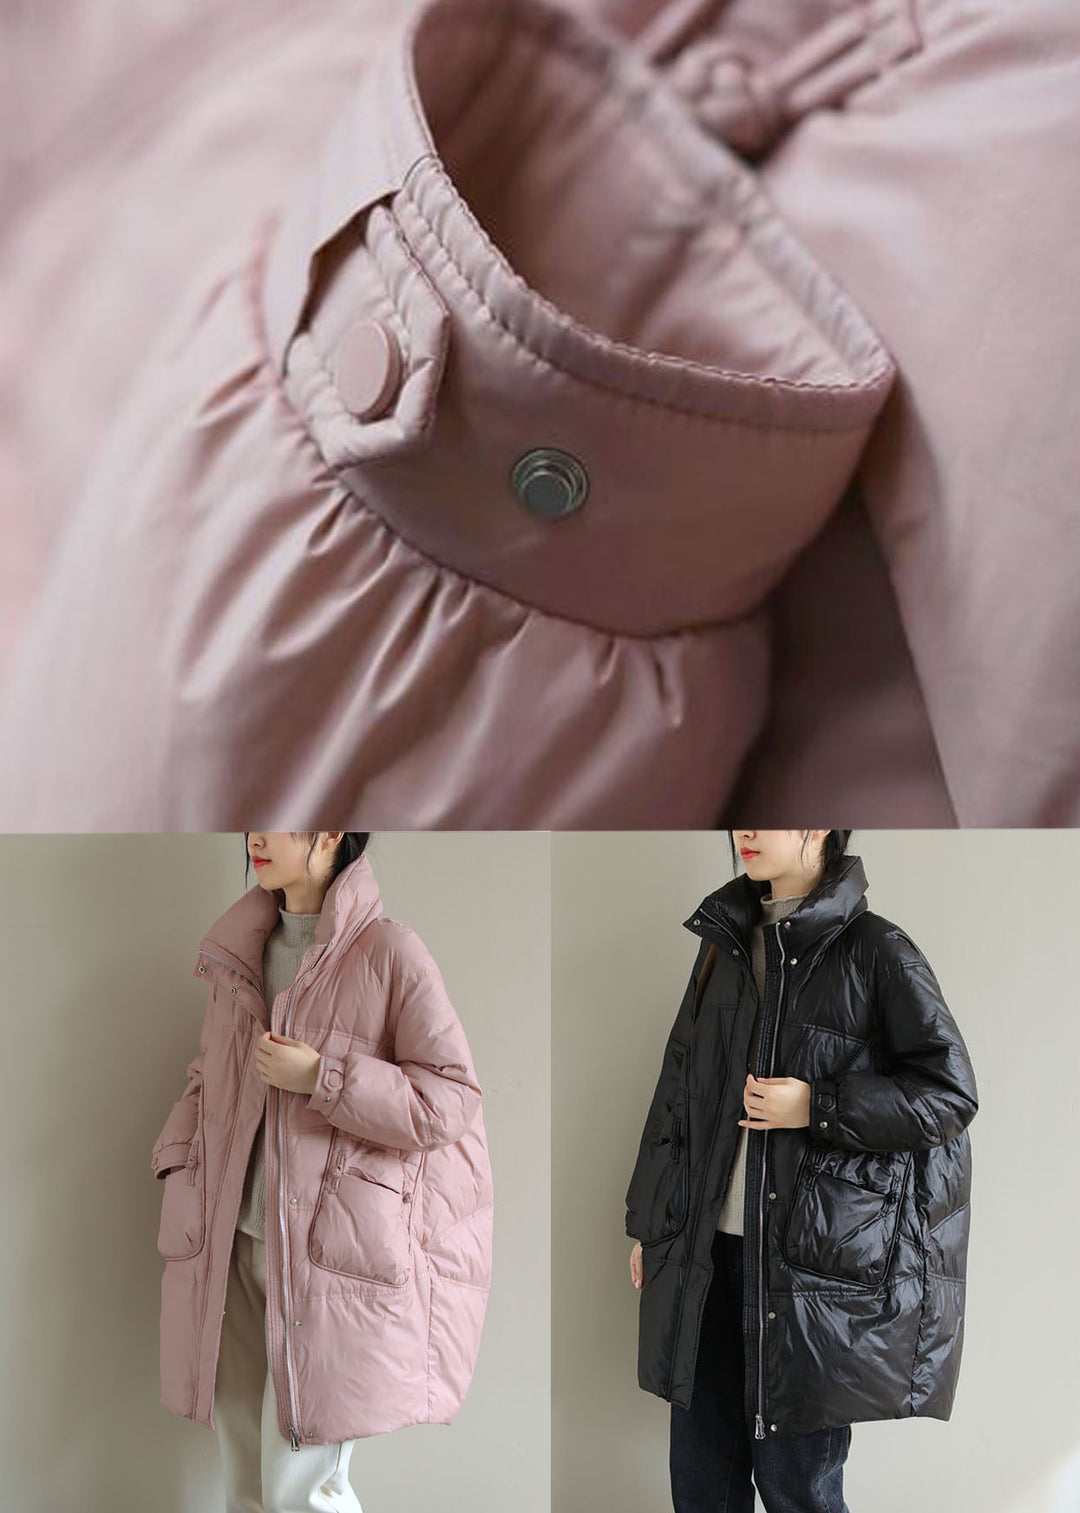 Black Thick Duck Down Down Coat Stand Collar Oversized Pockets Winter